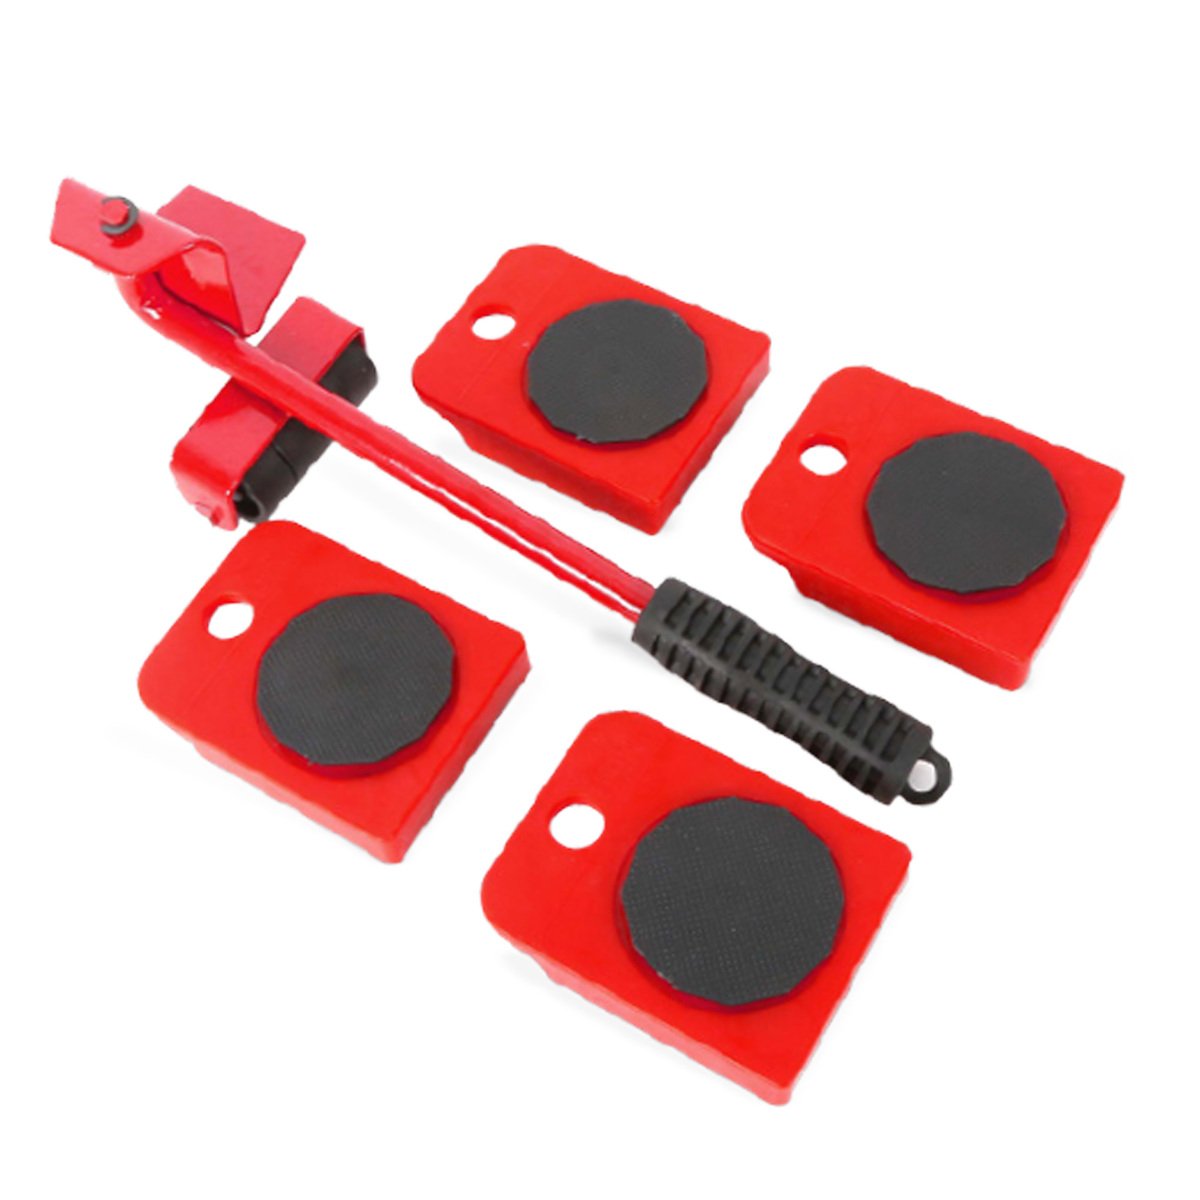 Powerman Roller Move Tools AW-1 Assorted Colors Online at Best Price ...